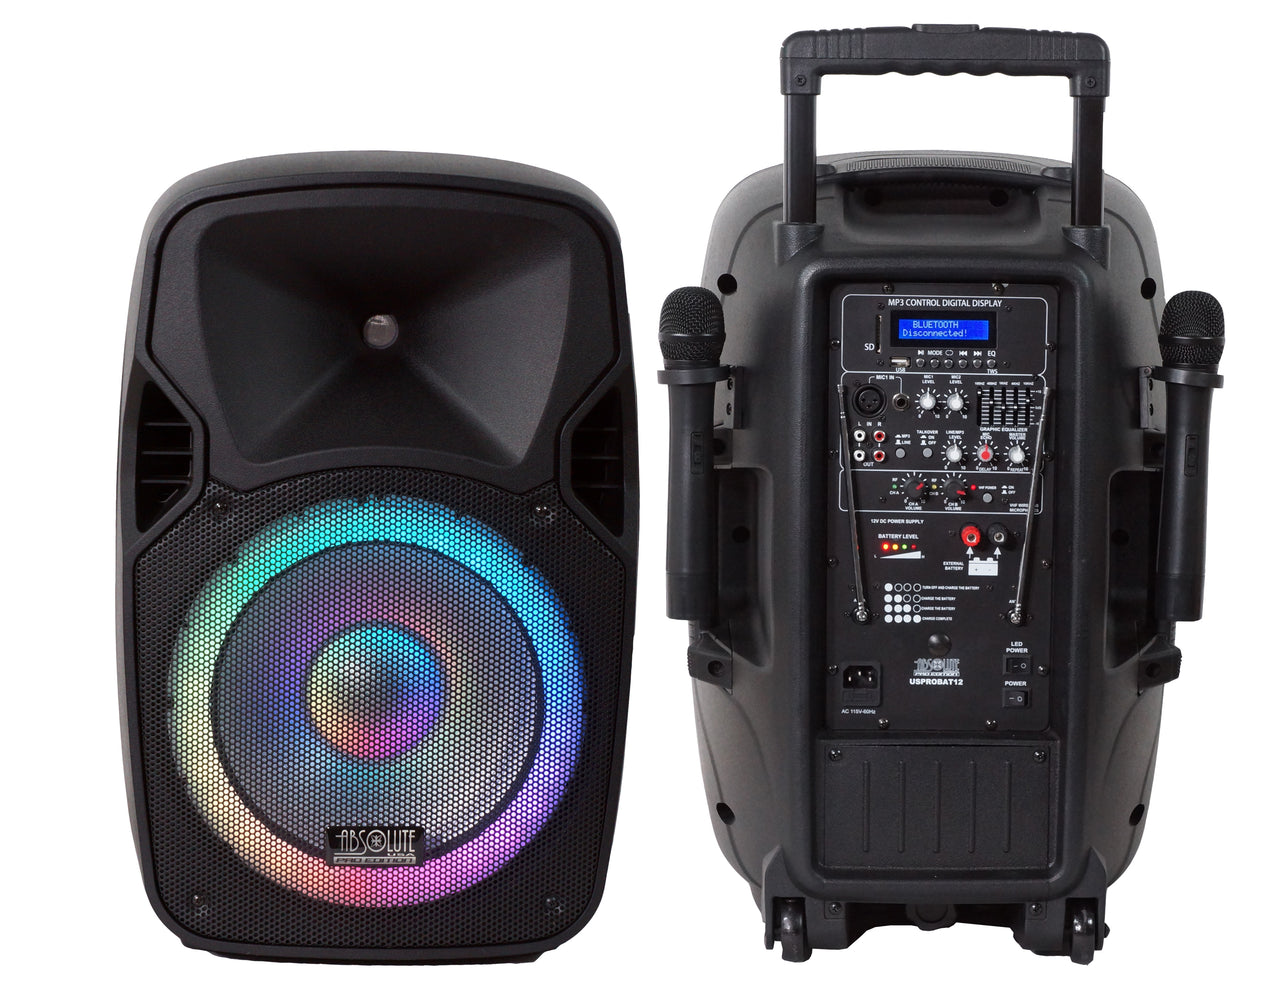 USPROBAT12 12" Wireless Portable PA Speaker System 3000W Powered Bluetooth Indoor & Outdoor DJ Stereo Loudspeaker with USB SD MP3 AUX Input, Flashing Party Light & FM Radio